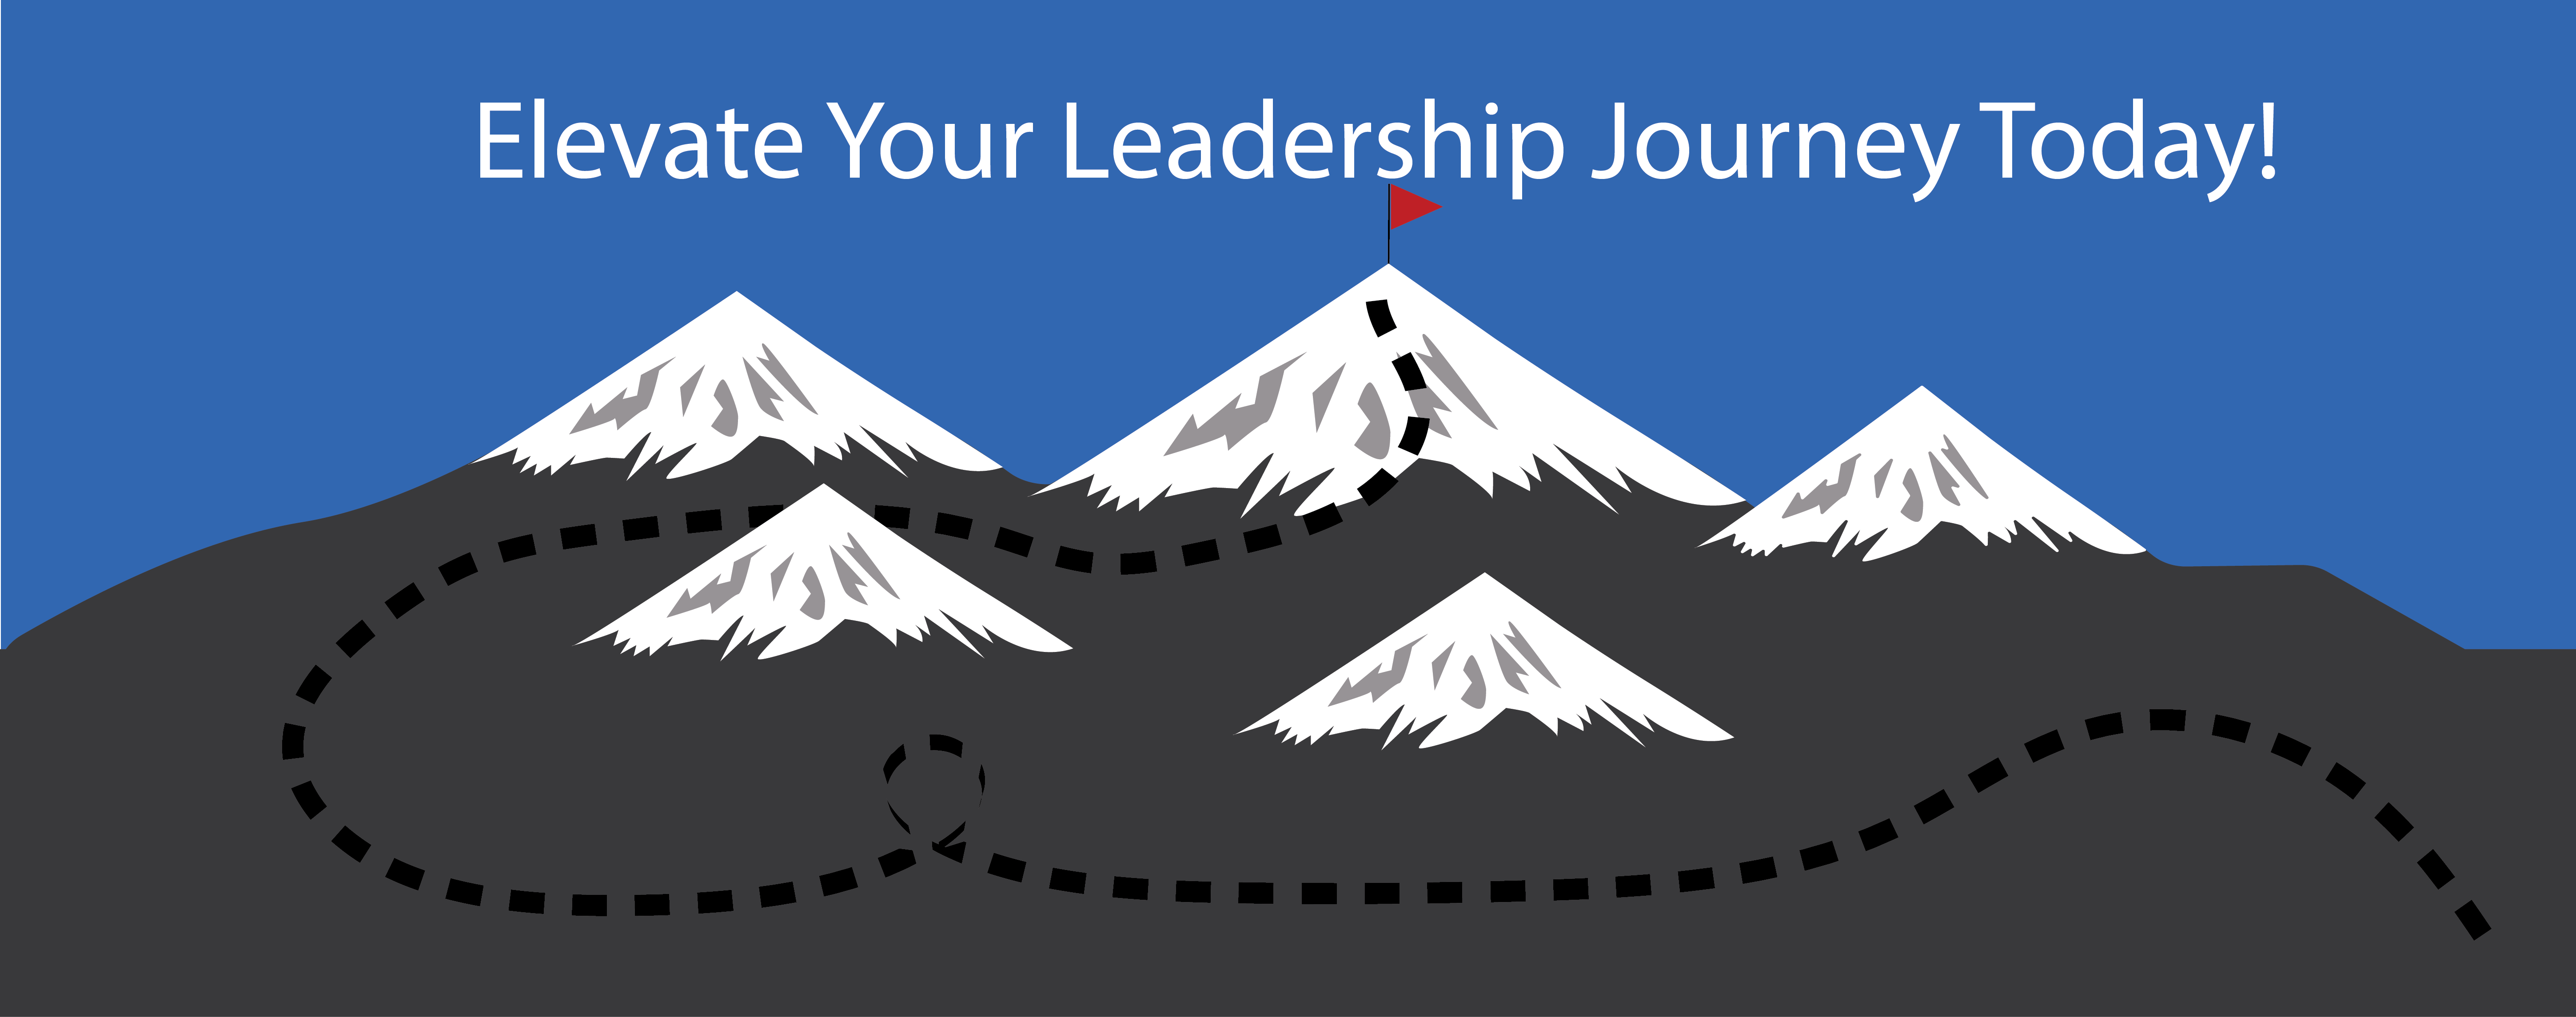 Elevate your Leadership Journey Today
